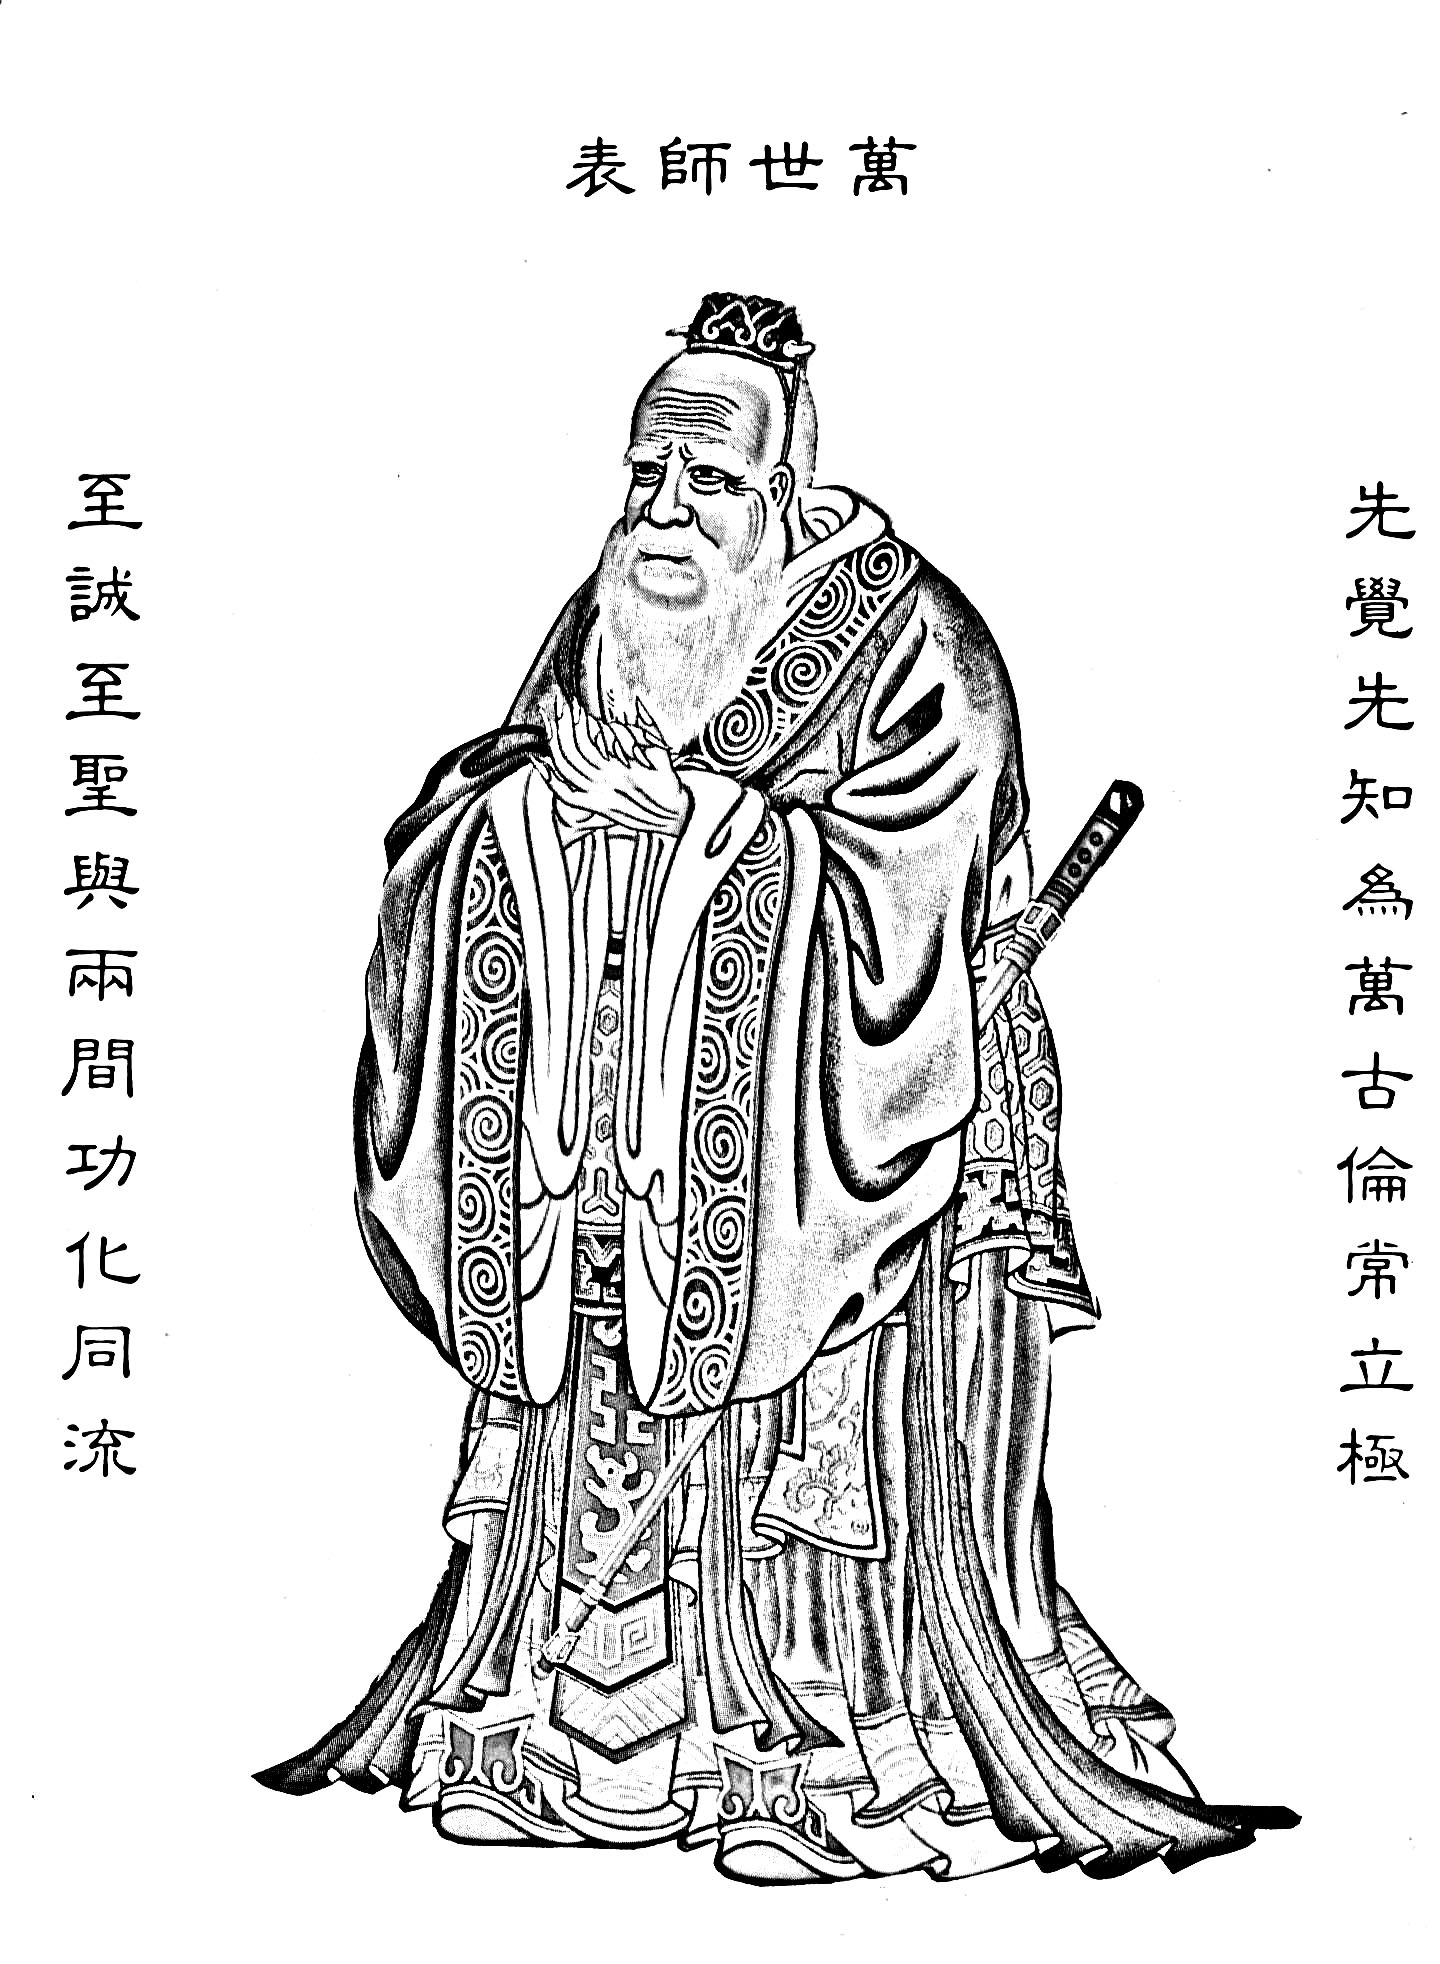 Confucius ... Chinese teacher, editor, politician, and philosopher of the Spring and Autumn period of Chinese